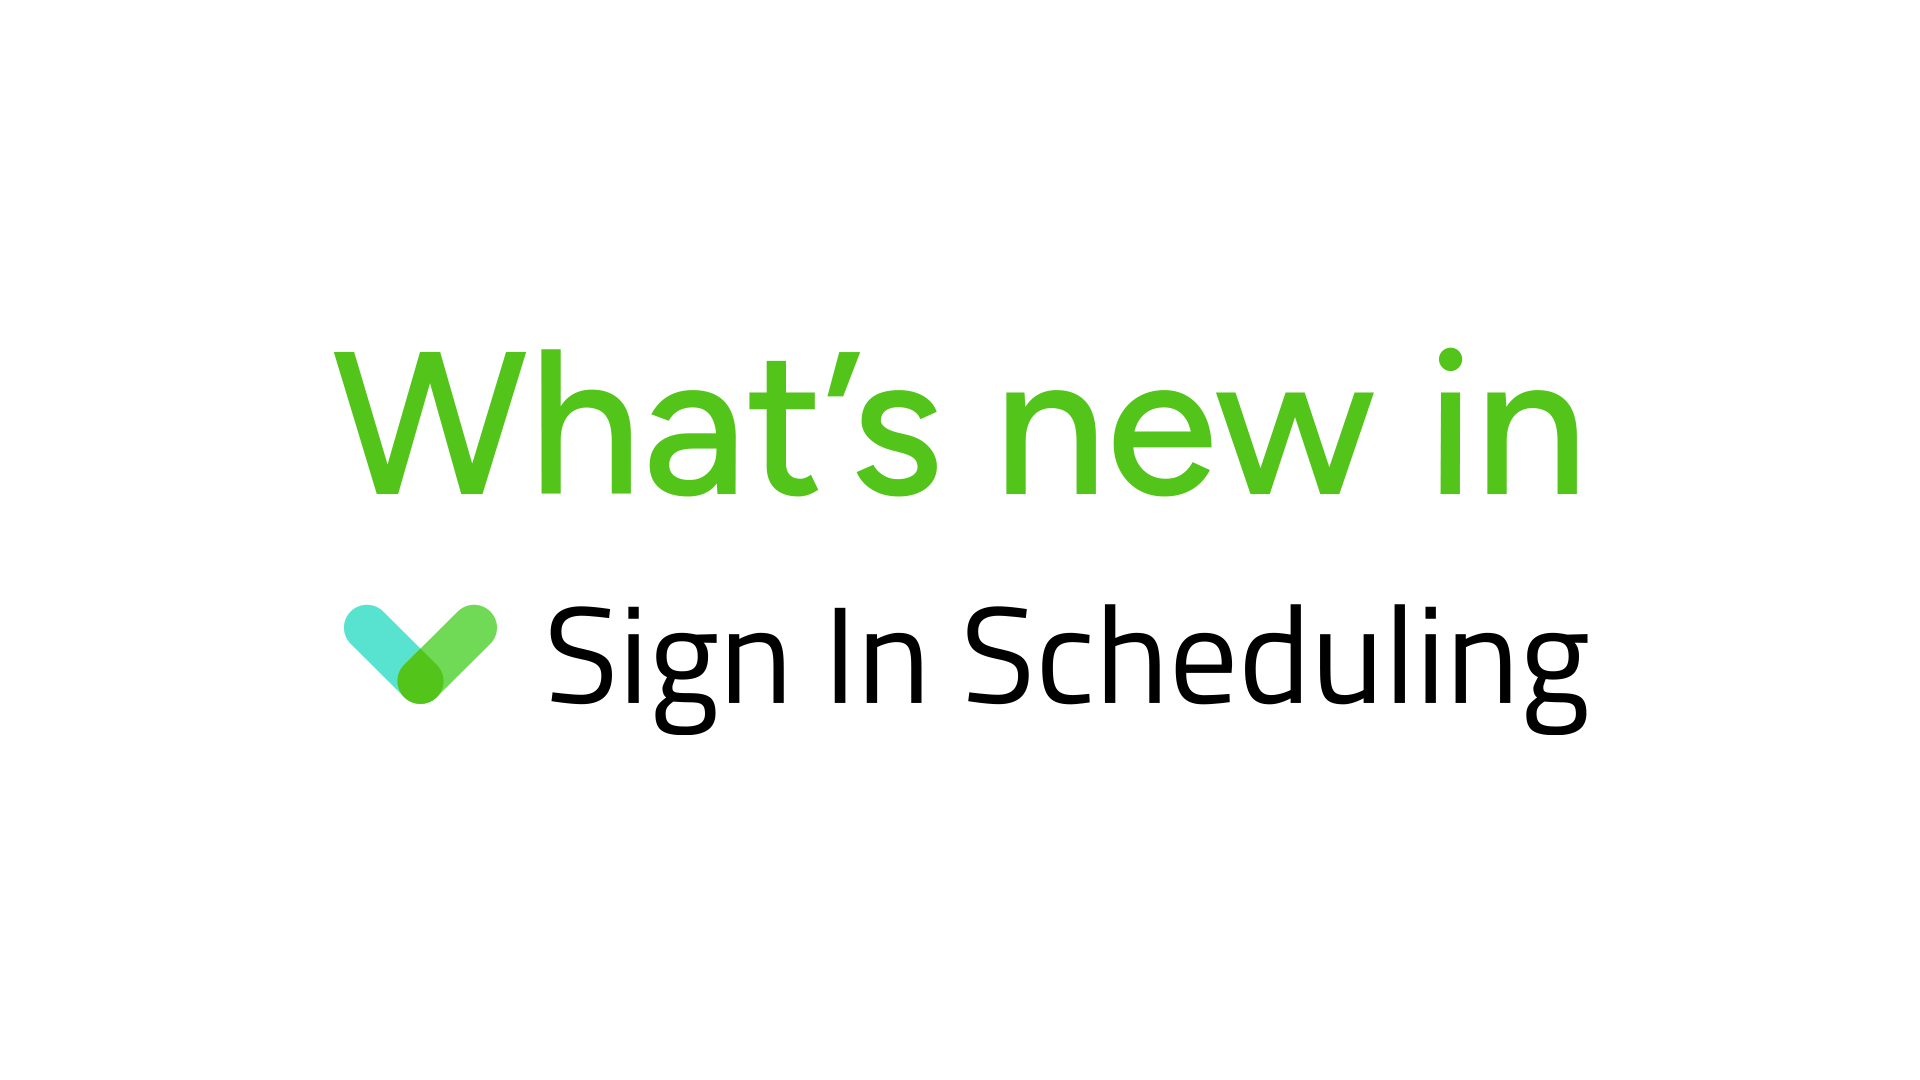 What's new in Sign In Scheduling